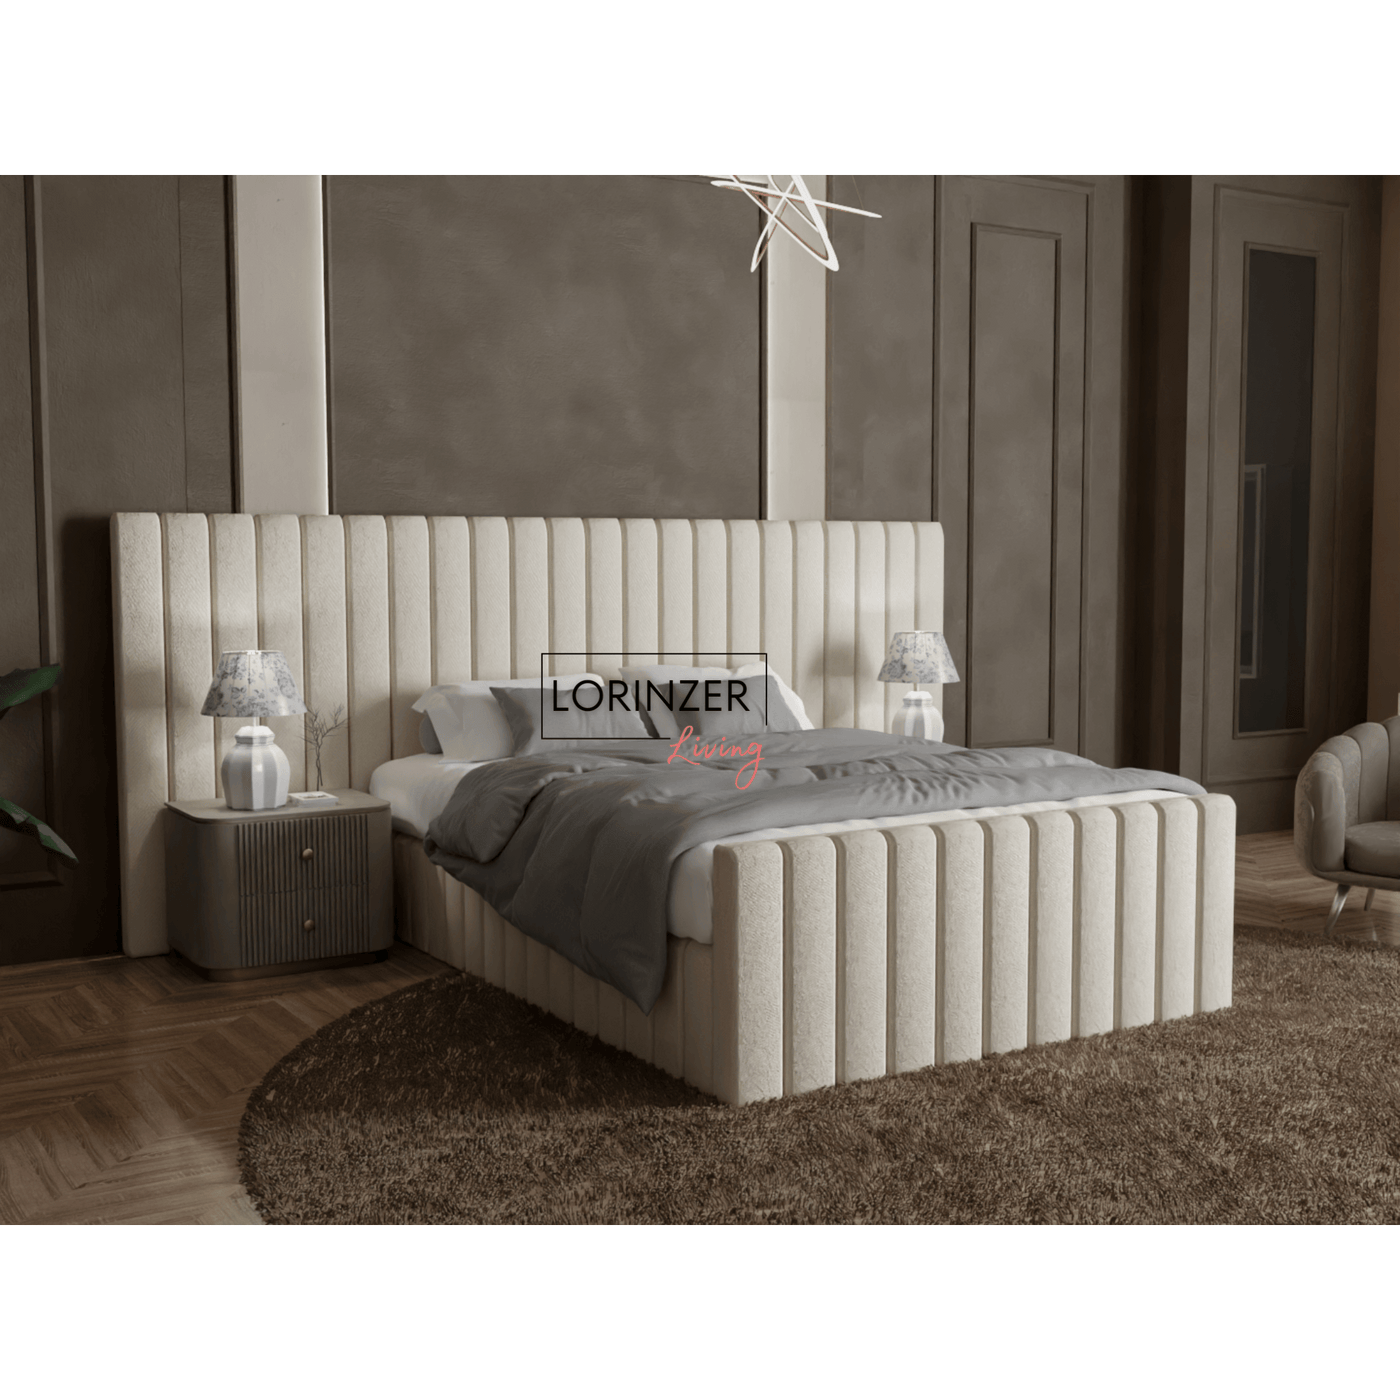 Hotel bed, wide extended headboard, ottoman bed, cream bed